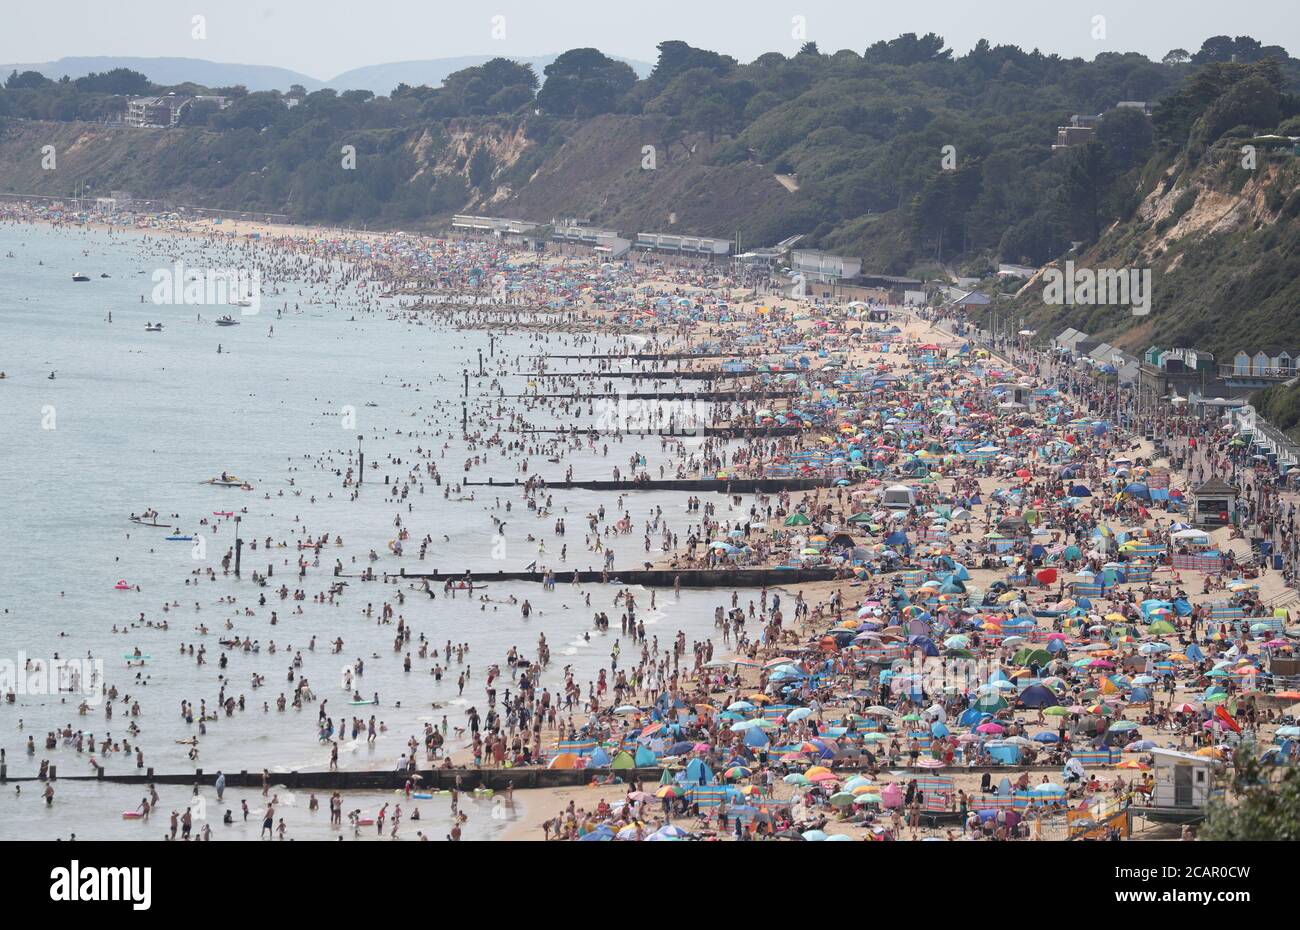 People enjoy the hot weather on Durley and Alum Chine beaches in Dorset. Stock Photo